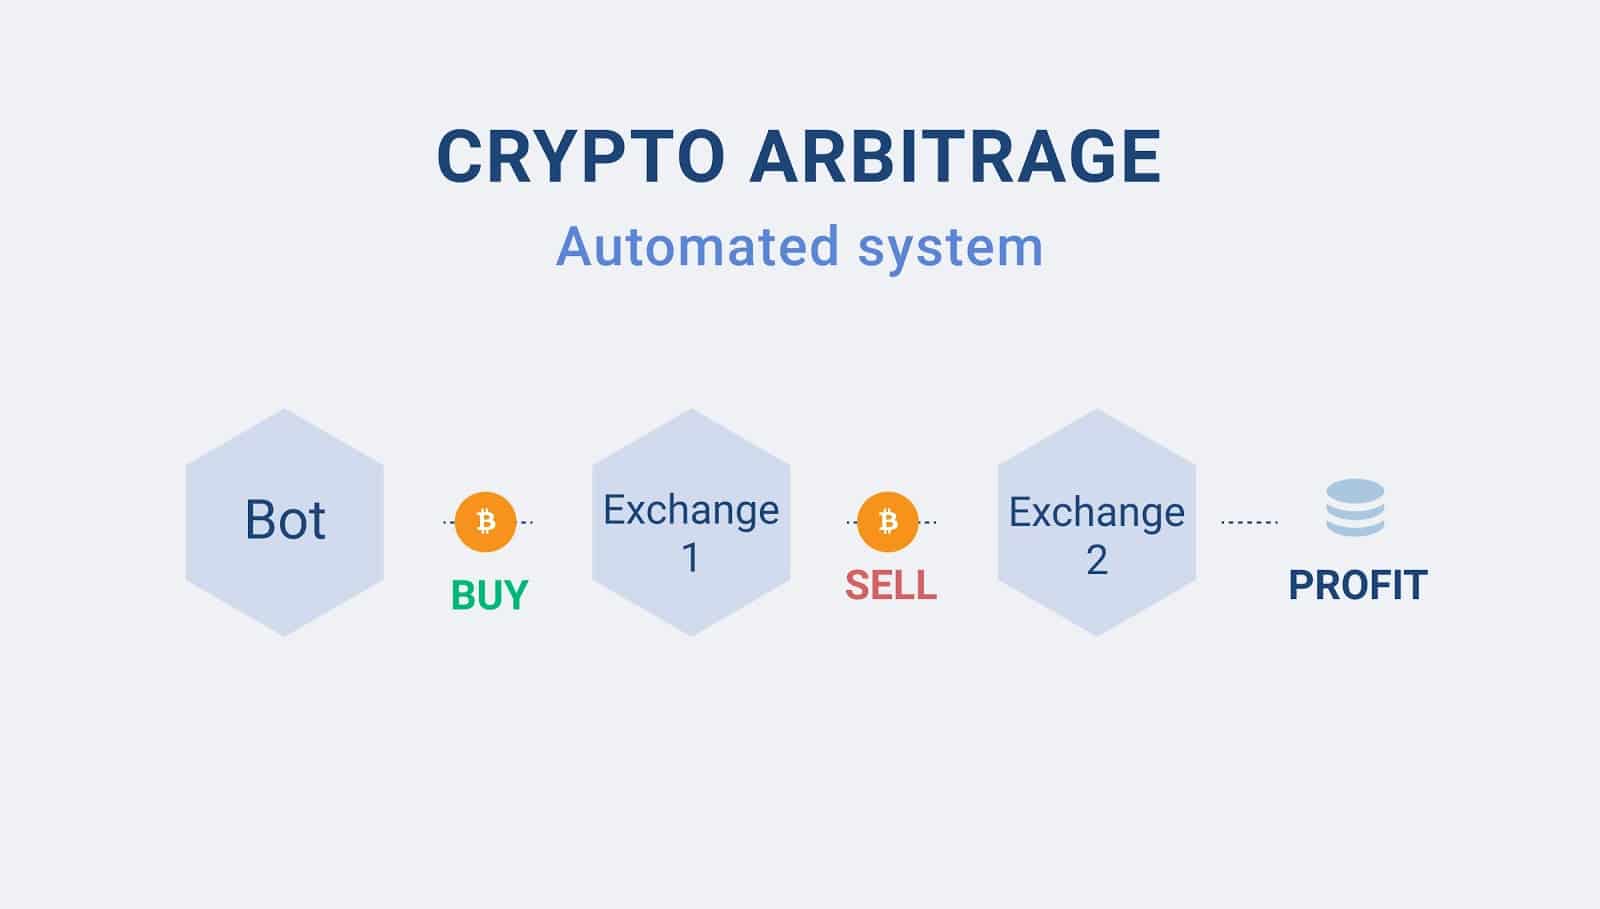 Using FIAT currencies to arbitrage on cryptocurrency exchanges - Journal of International Studies